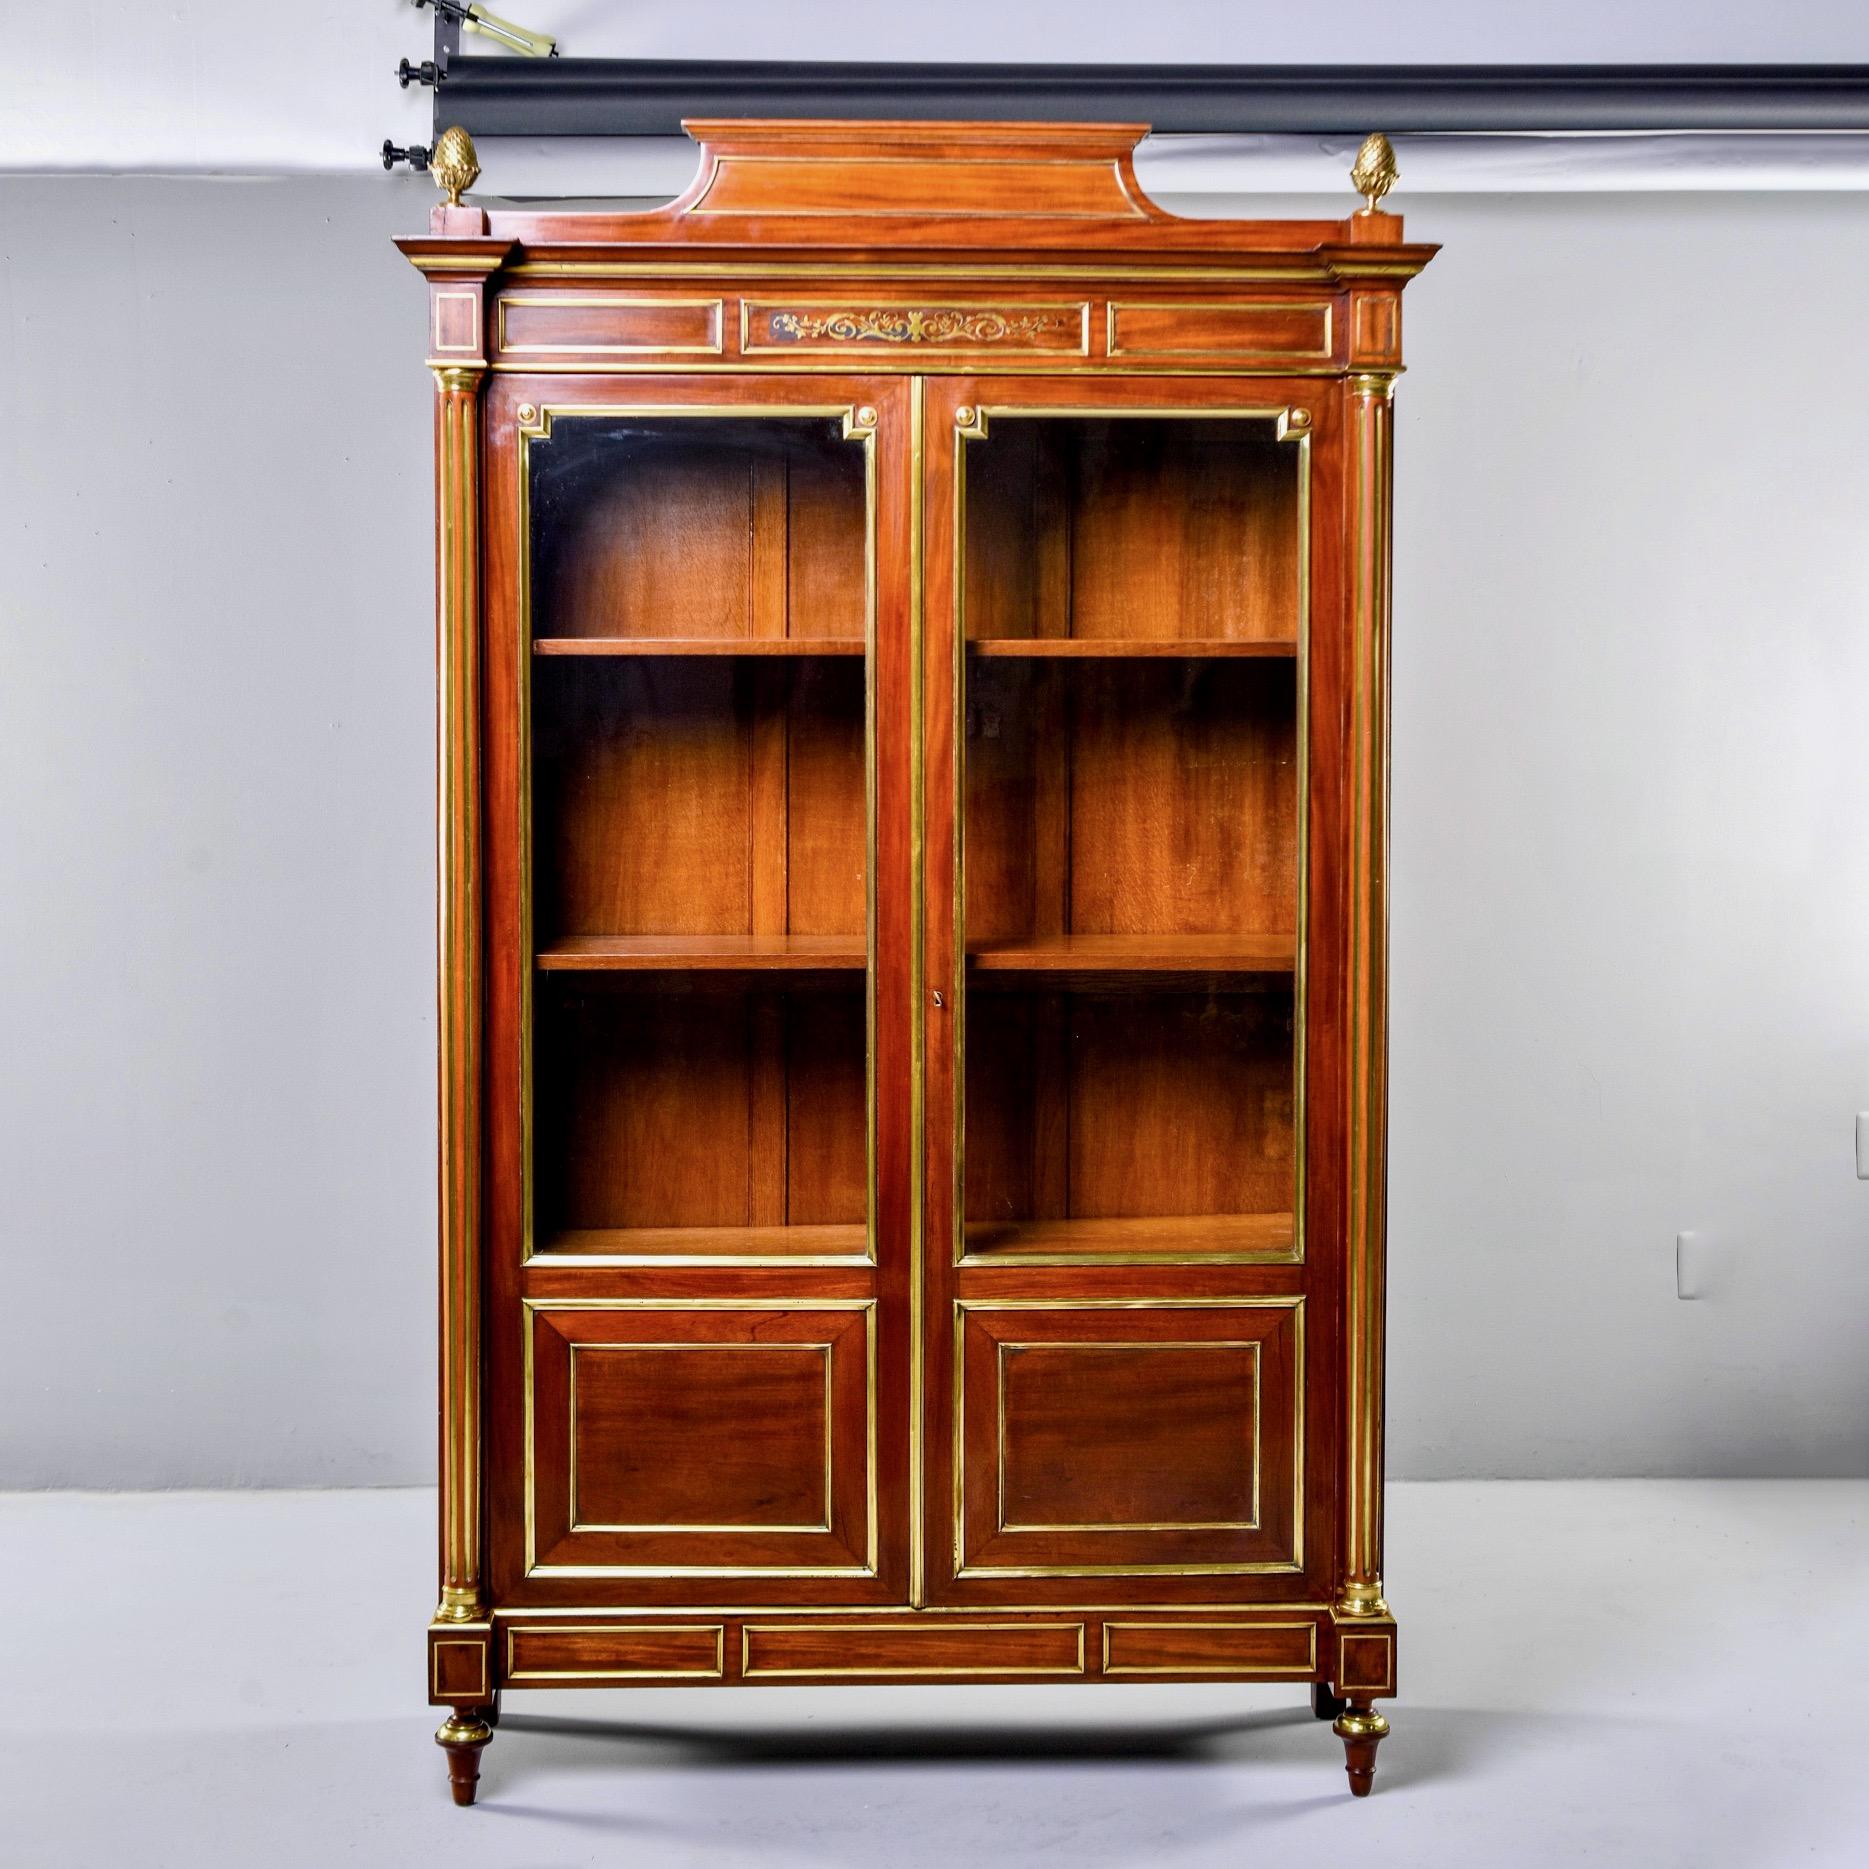 Tall French Louis XVI style vitrine in mahogany with extensive brass detailing, circa 1860s. Two hinged glass front doors open to a compartment with three internal shelves and functional key. Doors have decorative brass trim, and more decorative